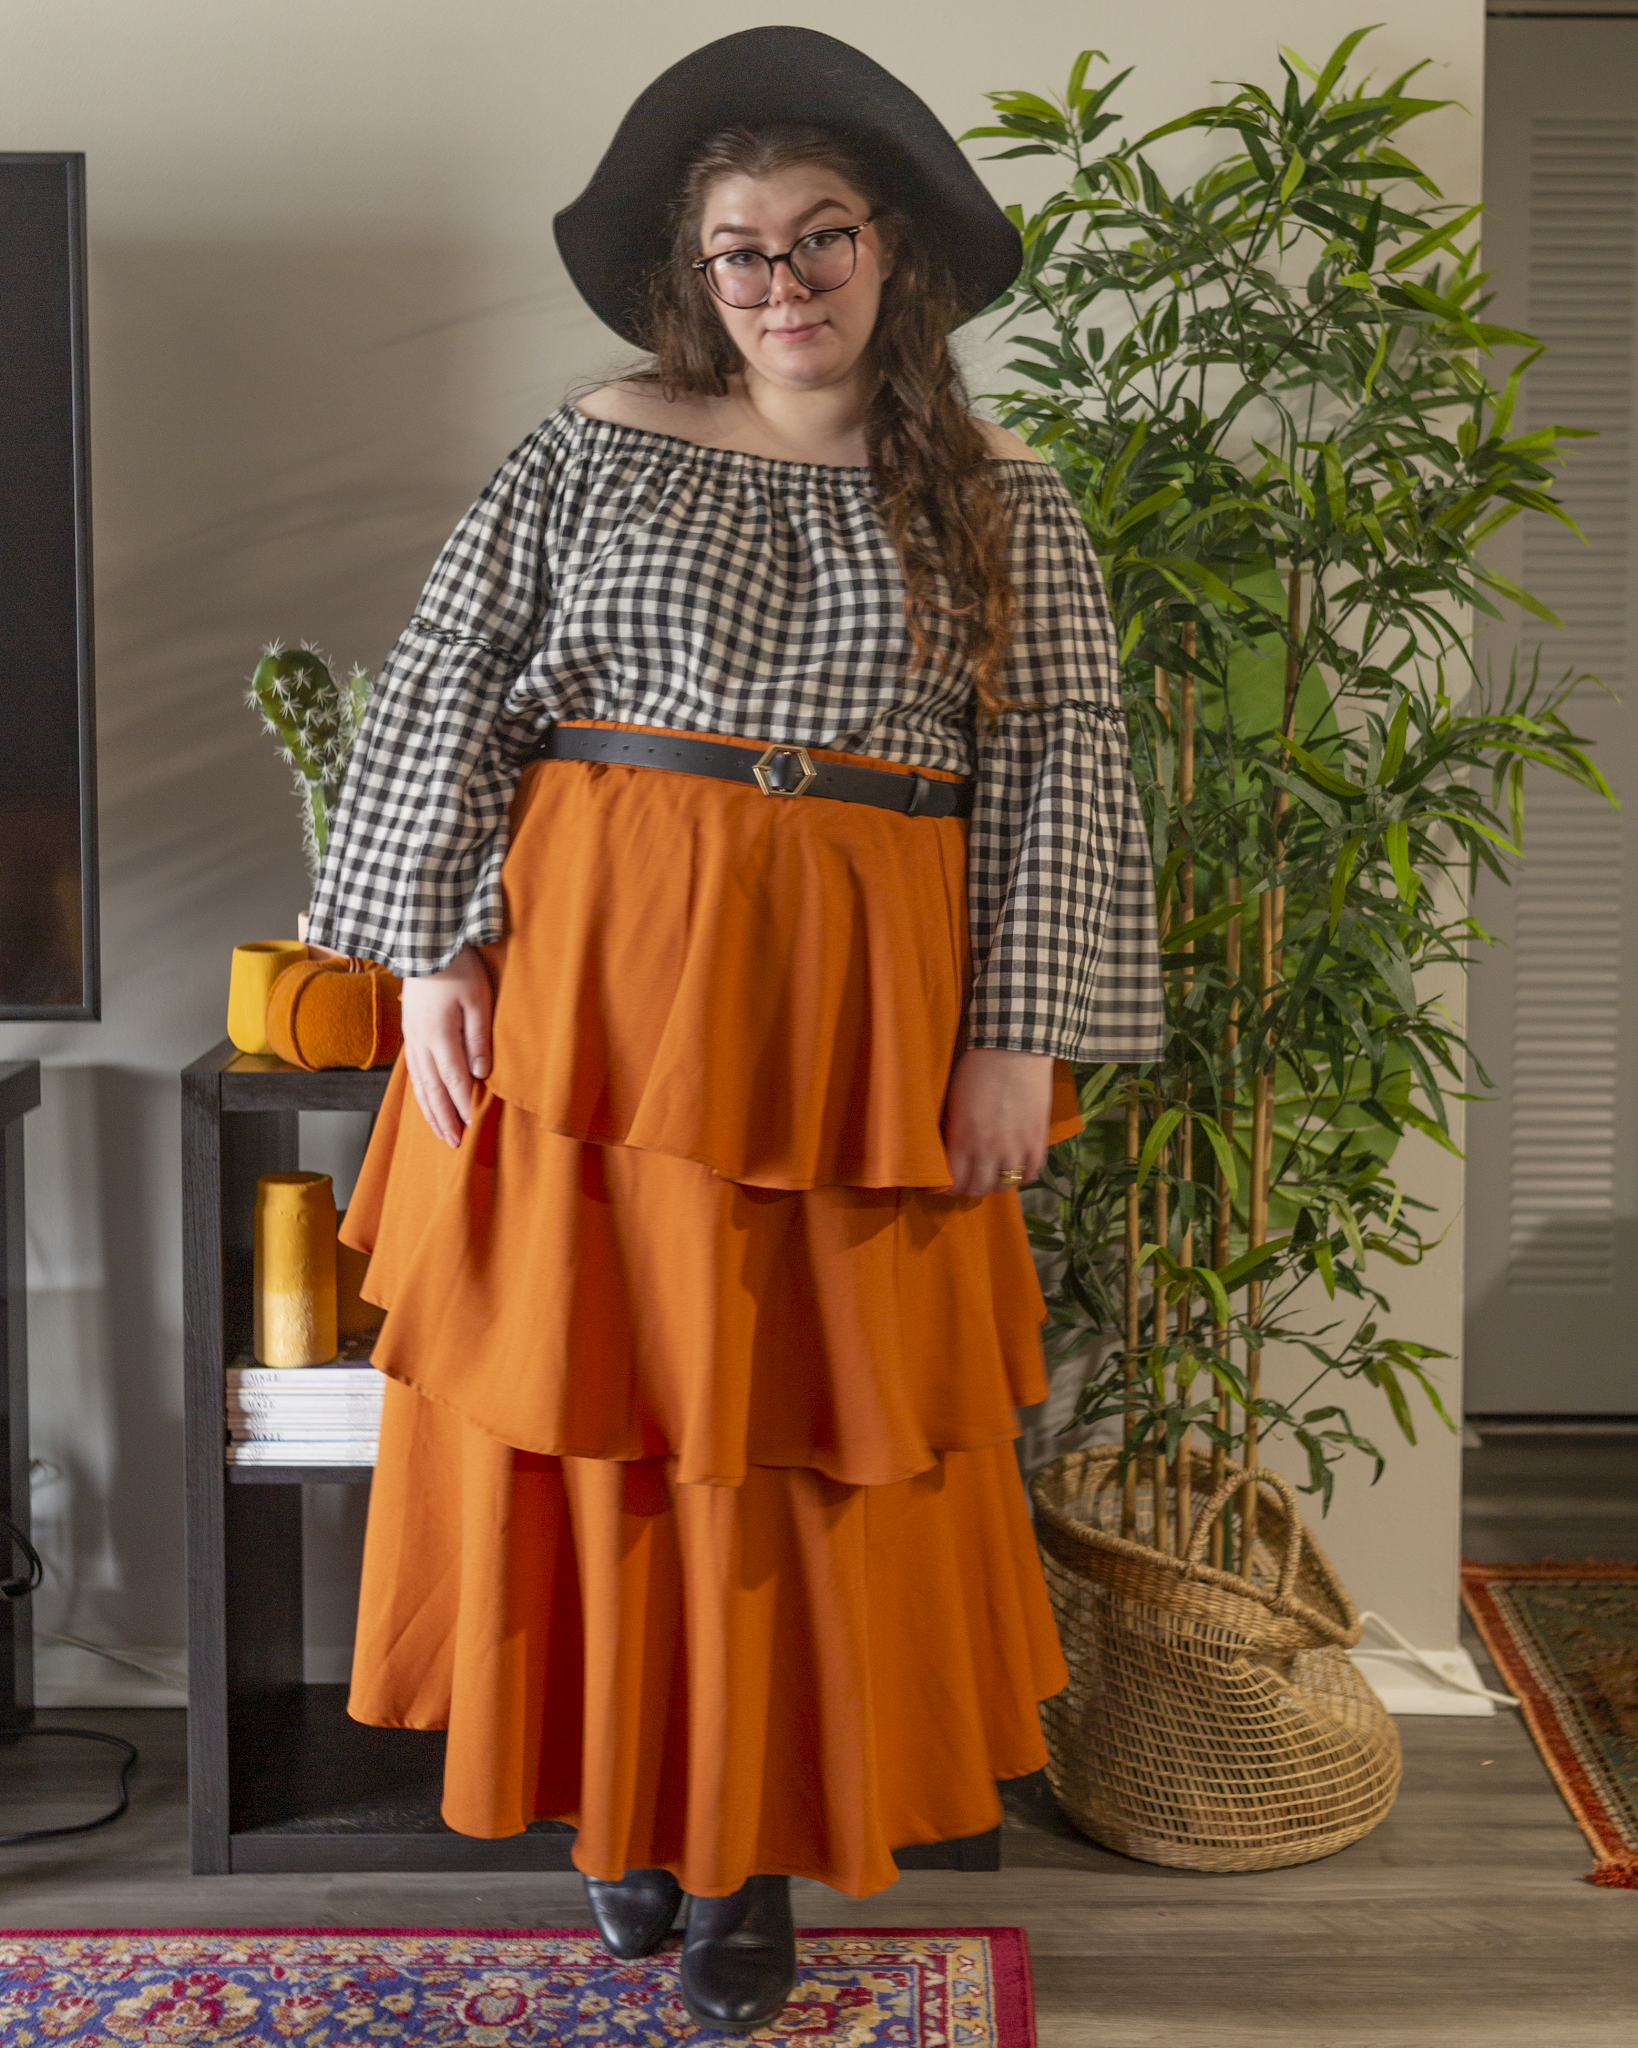 An outfit consisting of an a black wide brim floppy hat, a white and black gingham off the shoulder blouse with bell sleeves, tucked into an cinnamon orange three tier maxi skirt and black Chelsea boots.